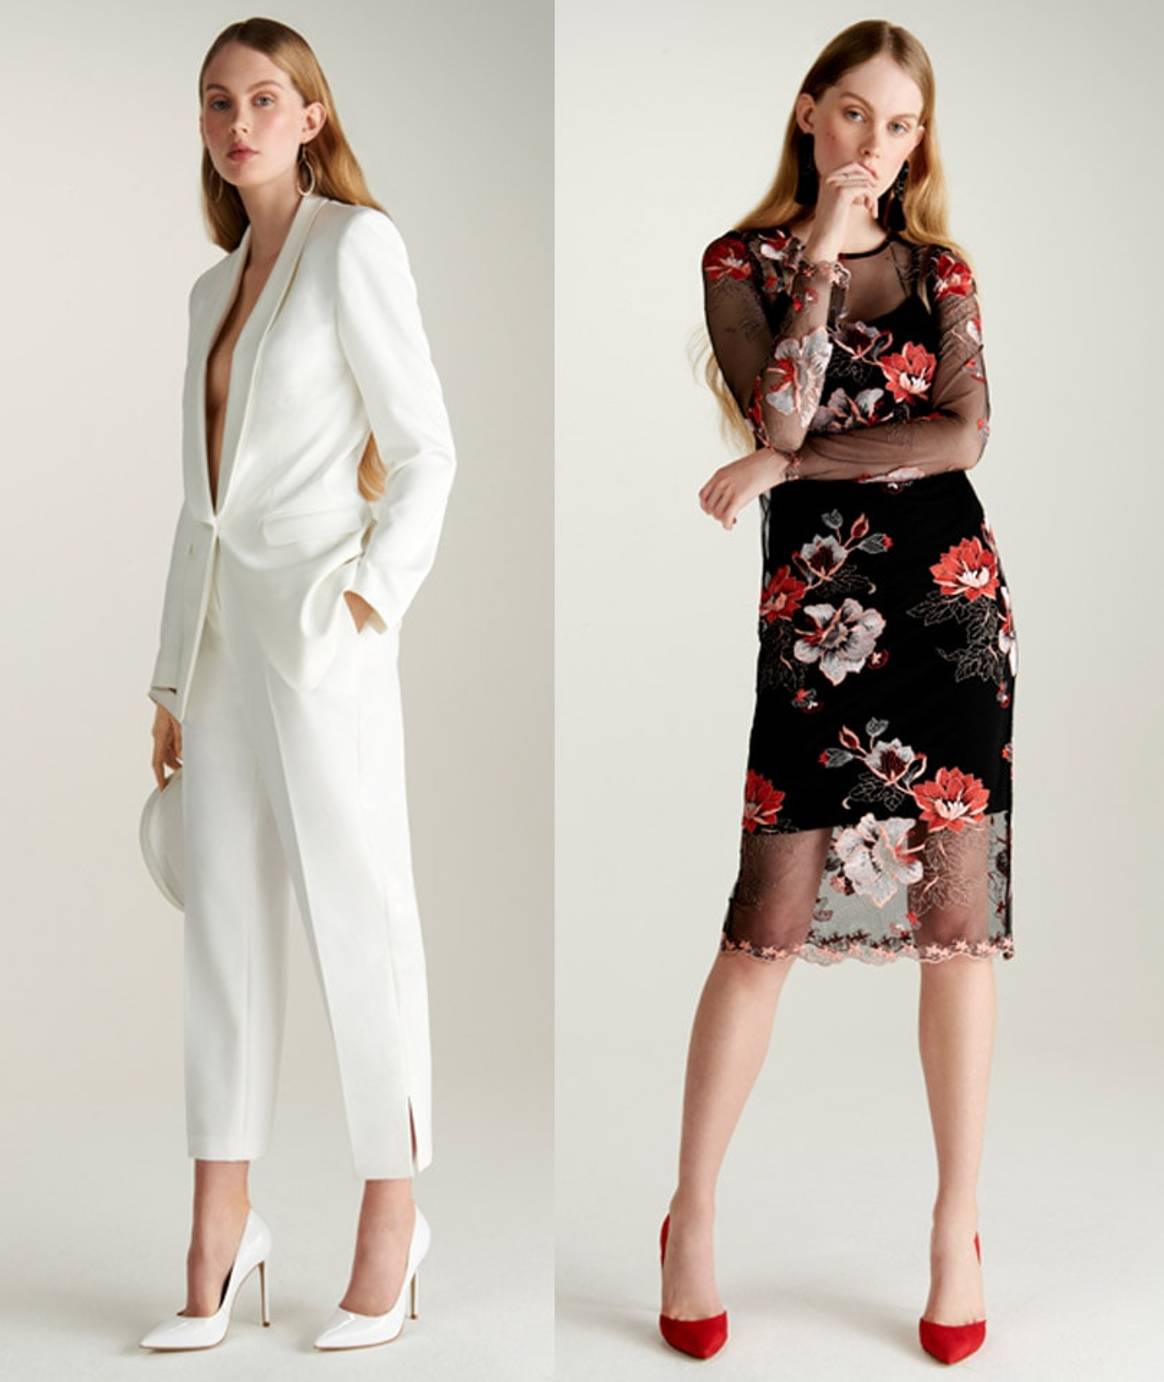 In Pictures: Amazon launches occasion wear brand Truth & Fable